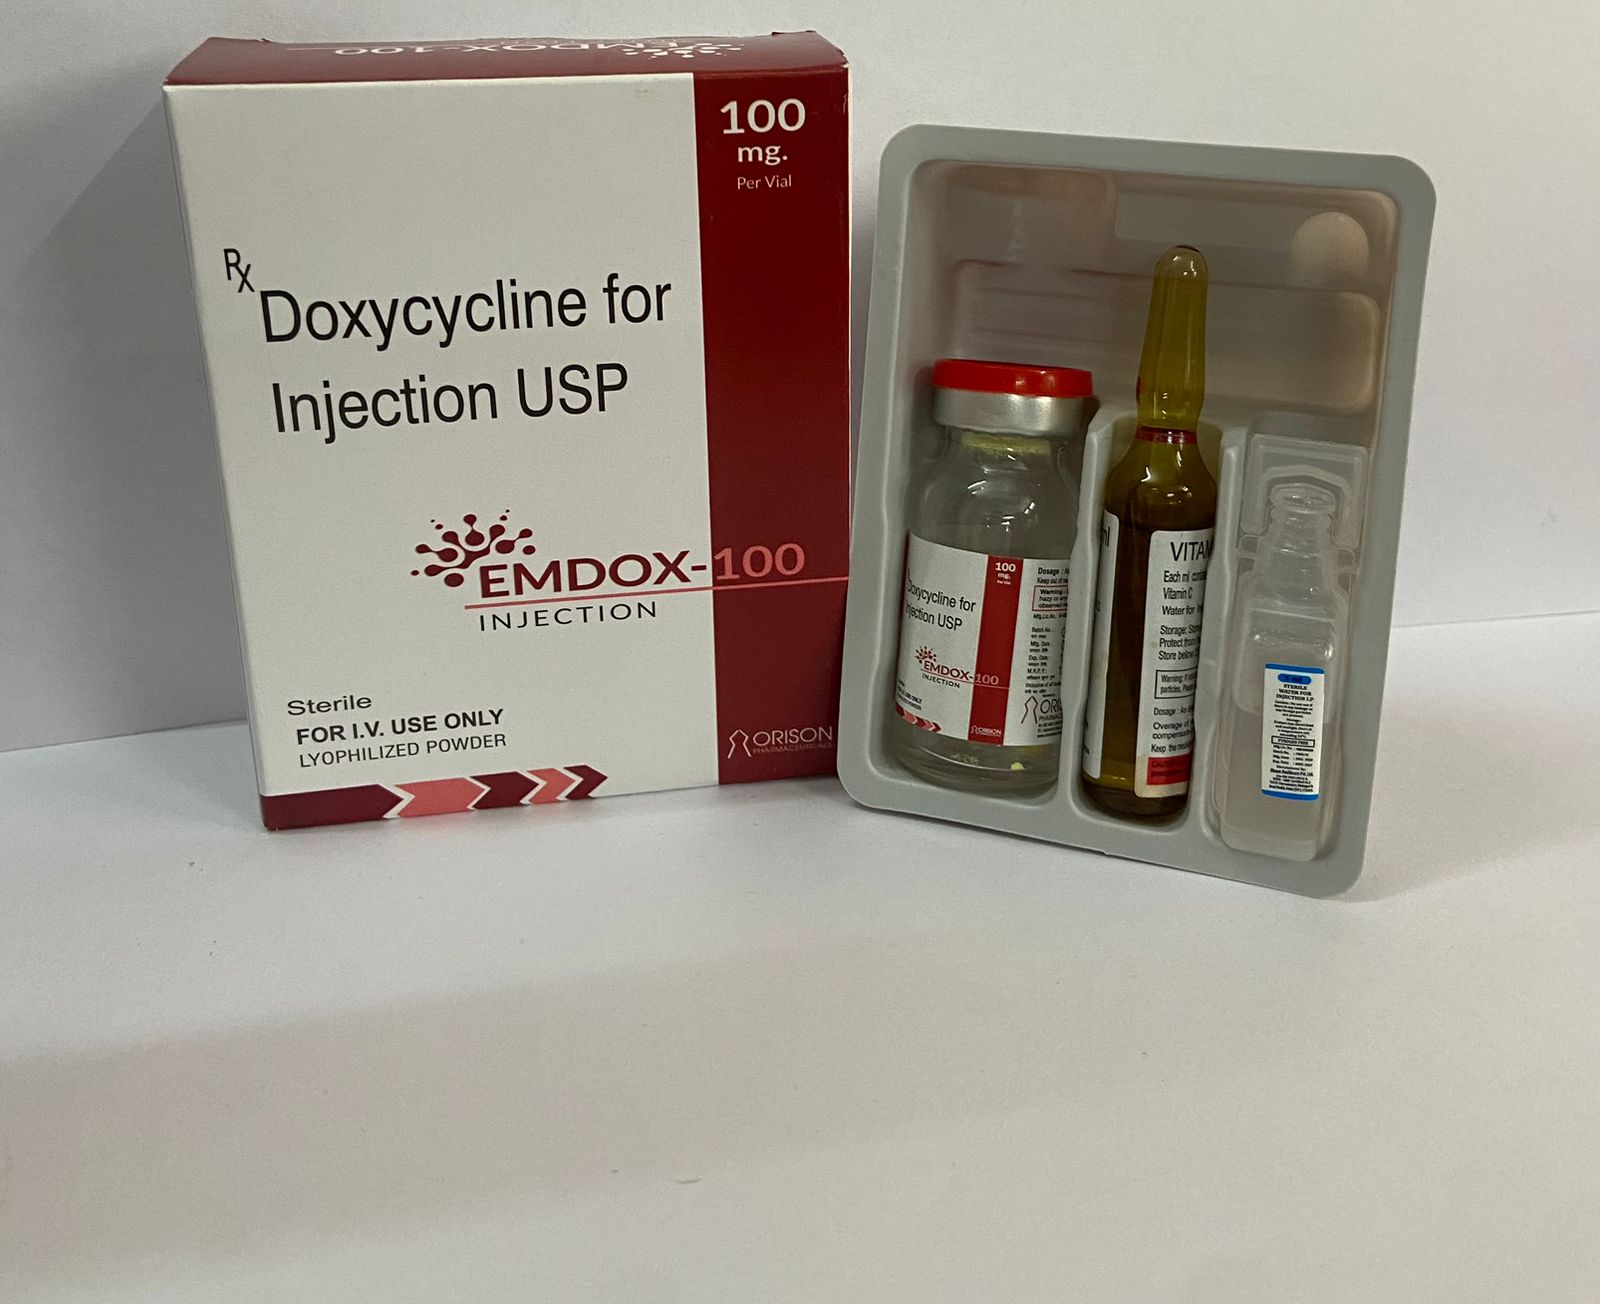 Product Name: Doxycycline For Injection USP, Compositions of Doxycycline For Injection USP are Doxycycline For Injection USP - Orison Pharmaceuticals